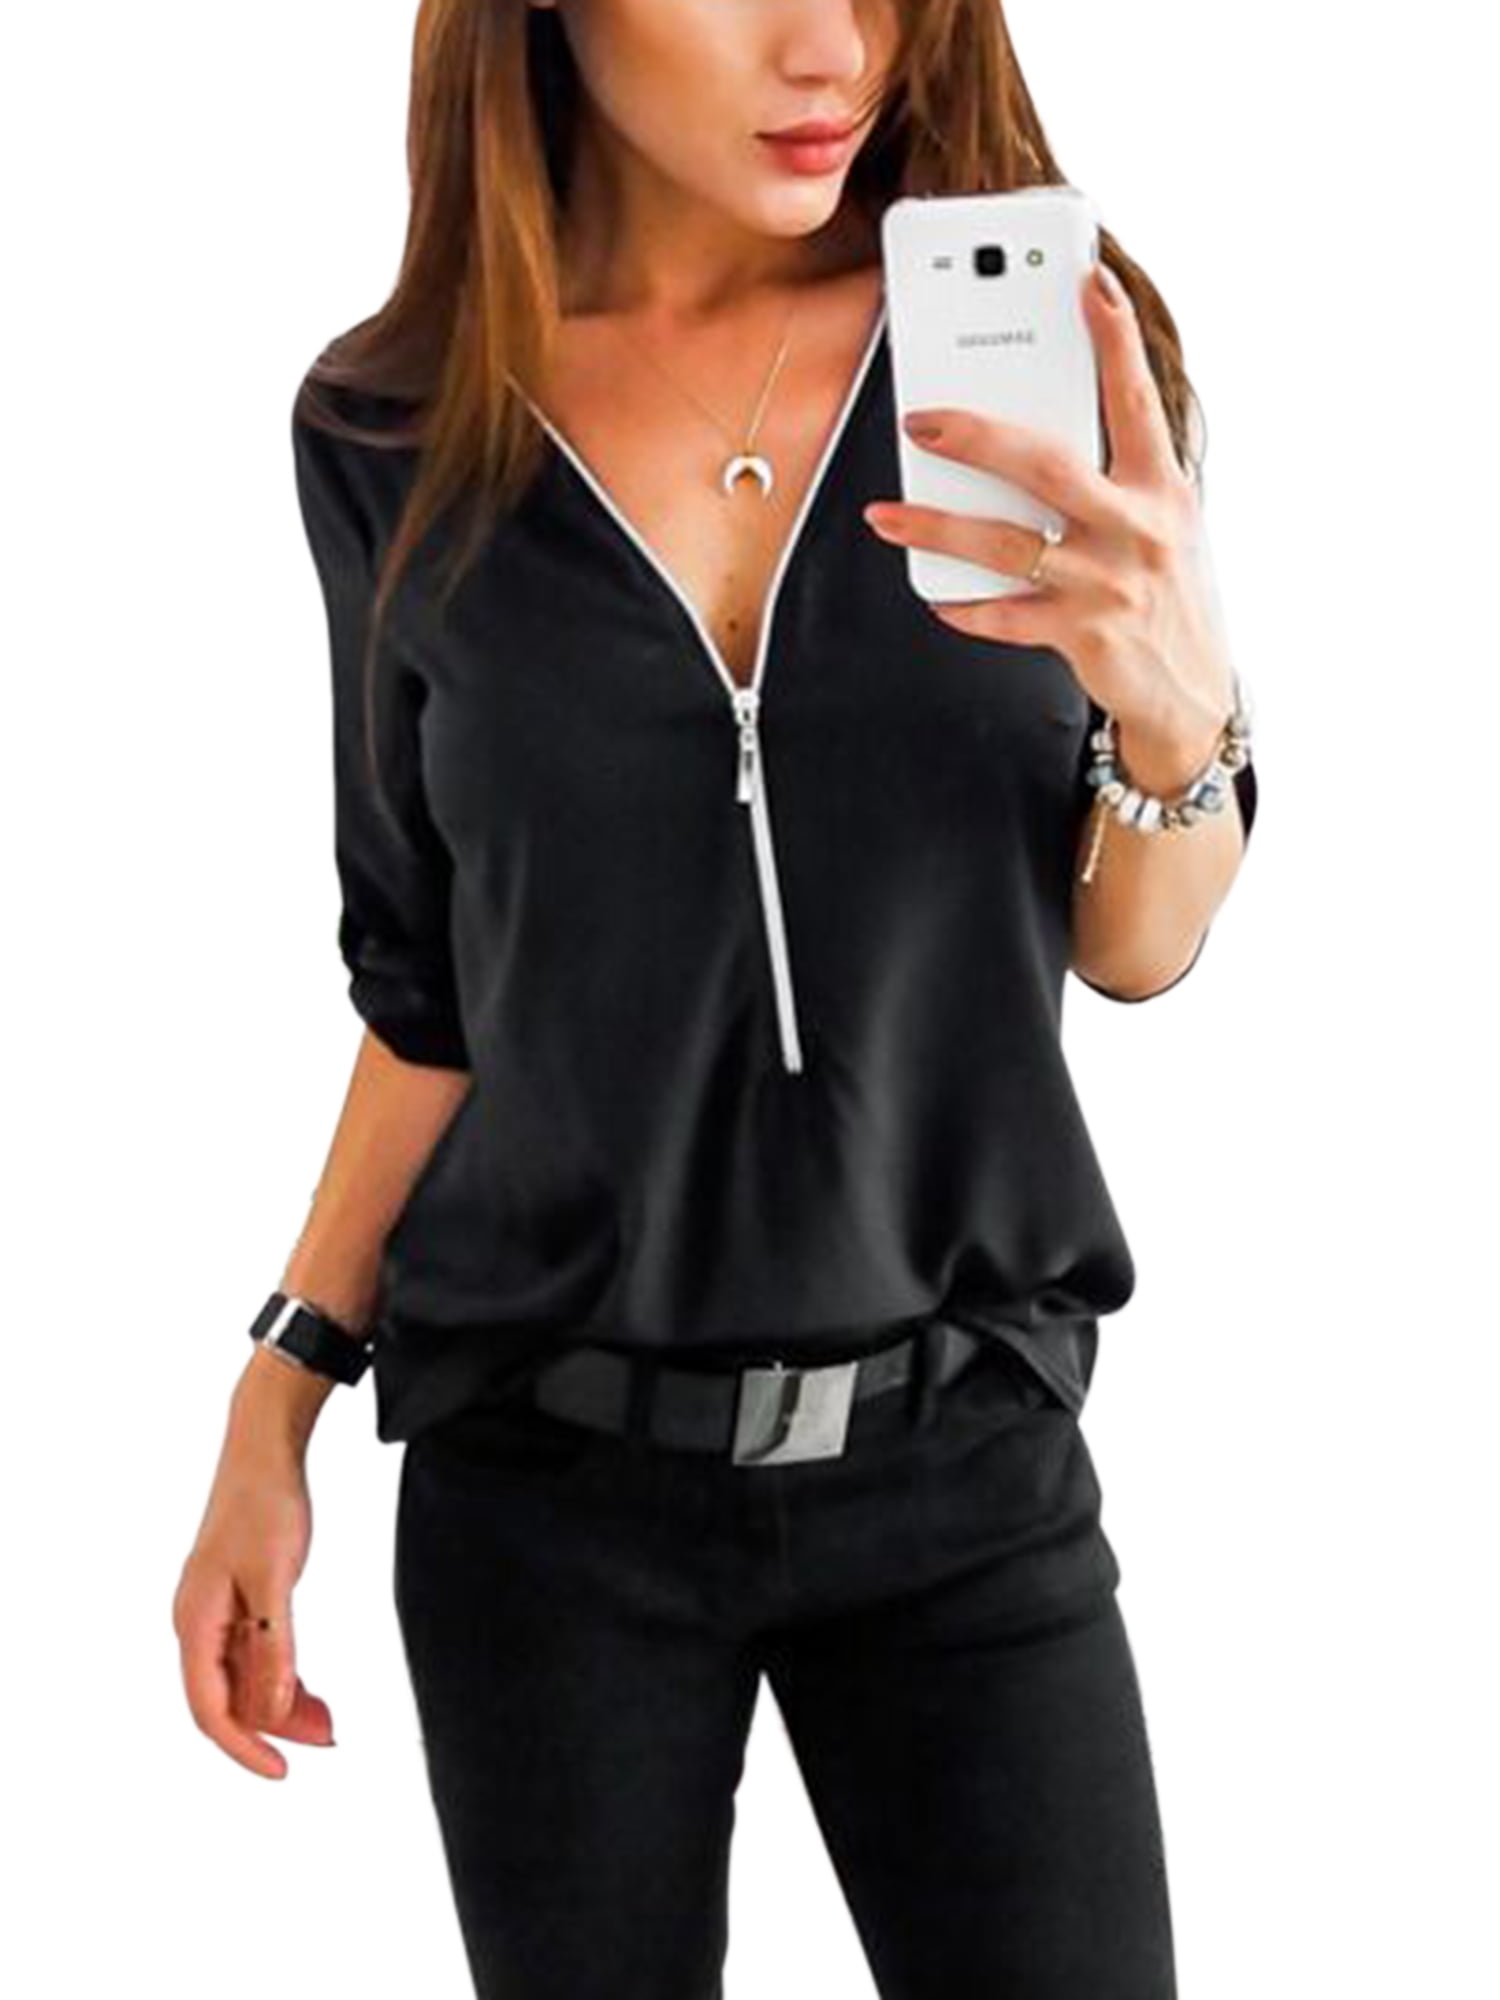 Oversized Tunics for Women to Wear with Leggings Long Cuffed Sleeve Tops V Neck Blouse Solid Shirts Plus Size.M-5XL 